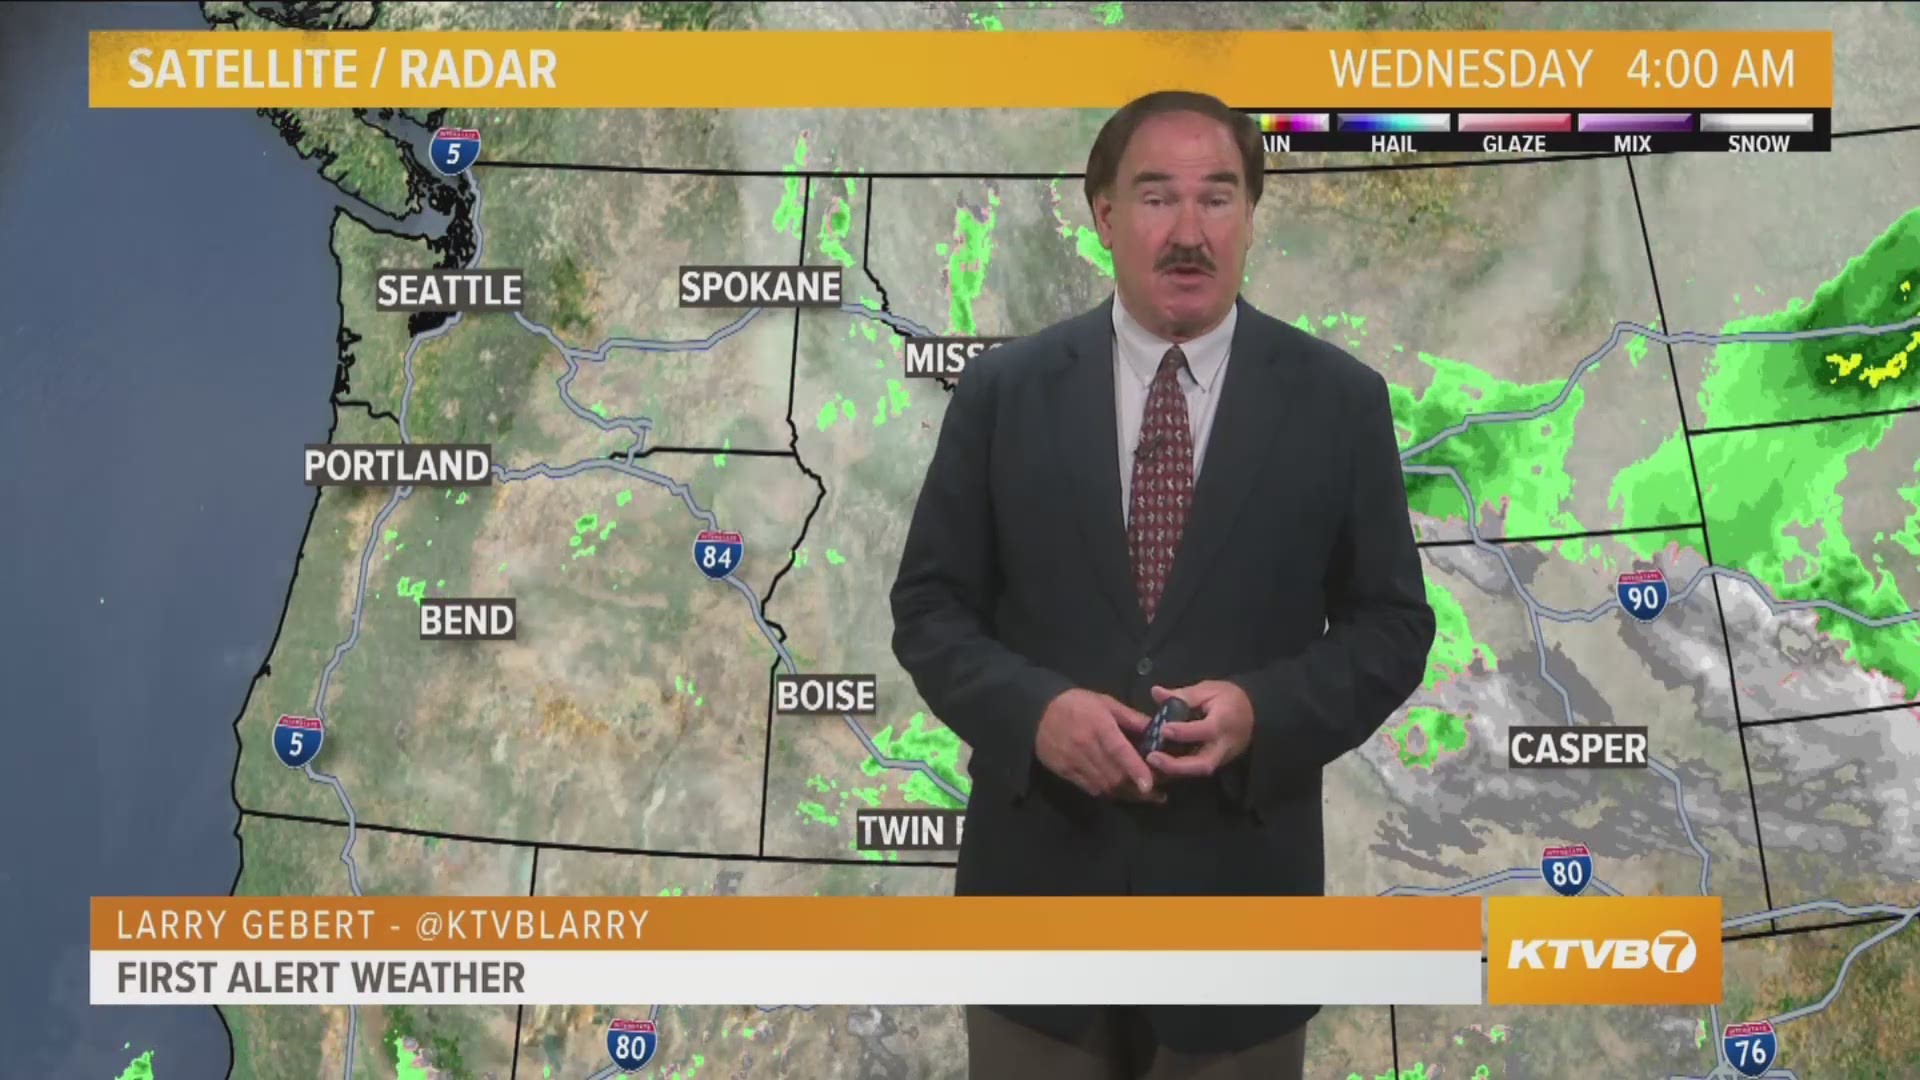 Larry Gebert let's us know when the rain is expected to let up.